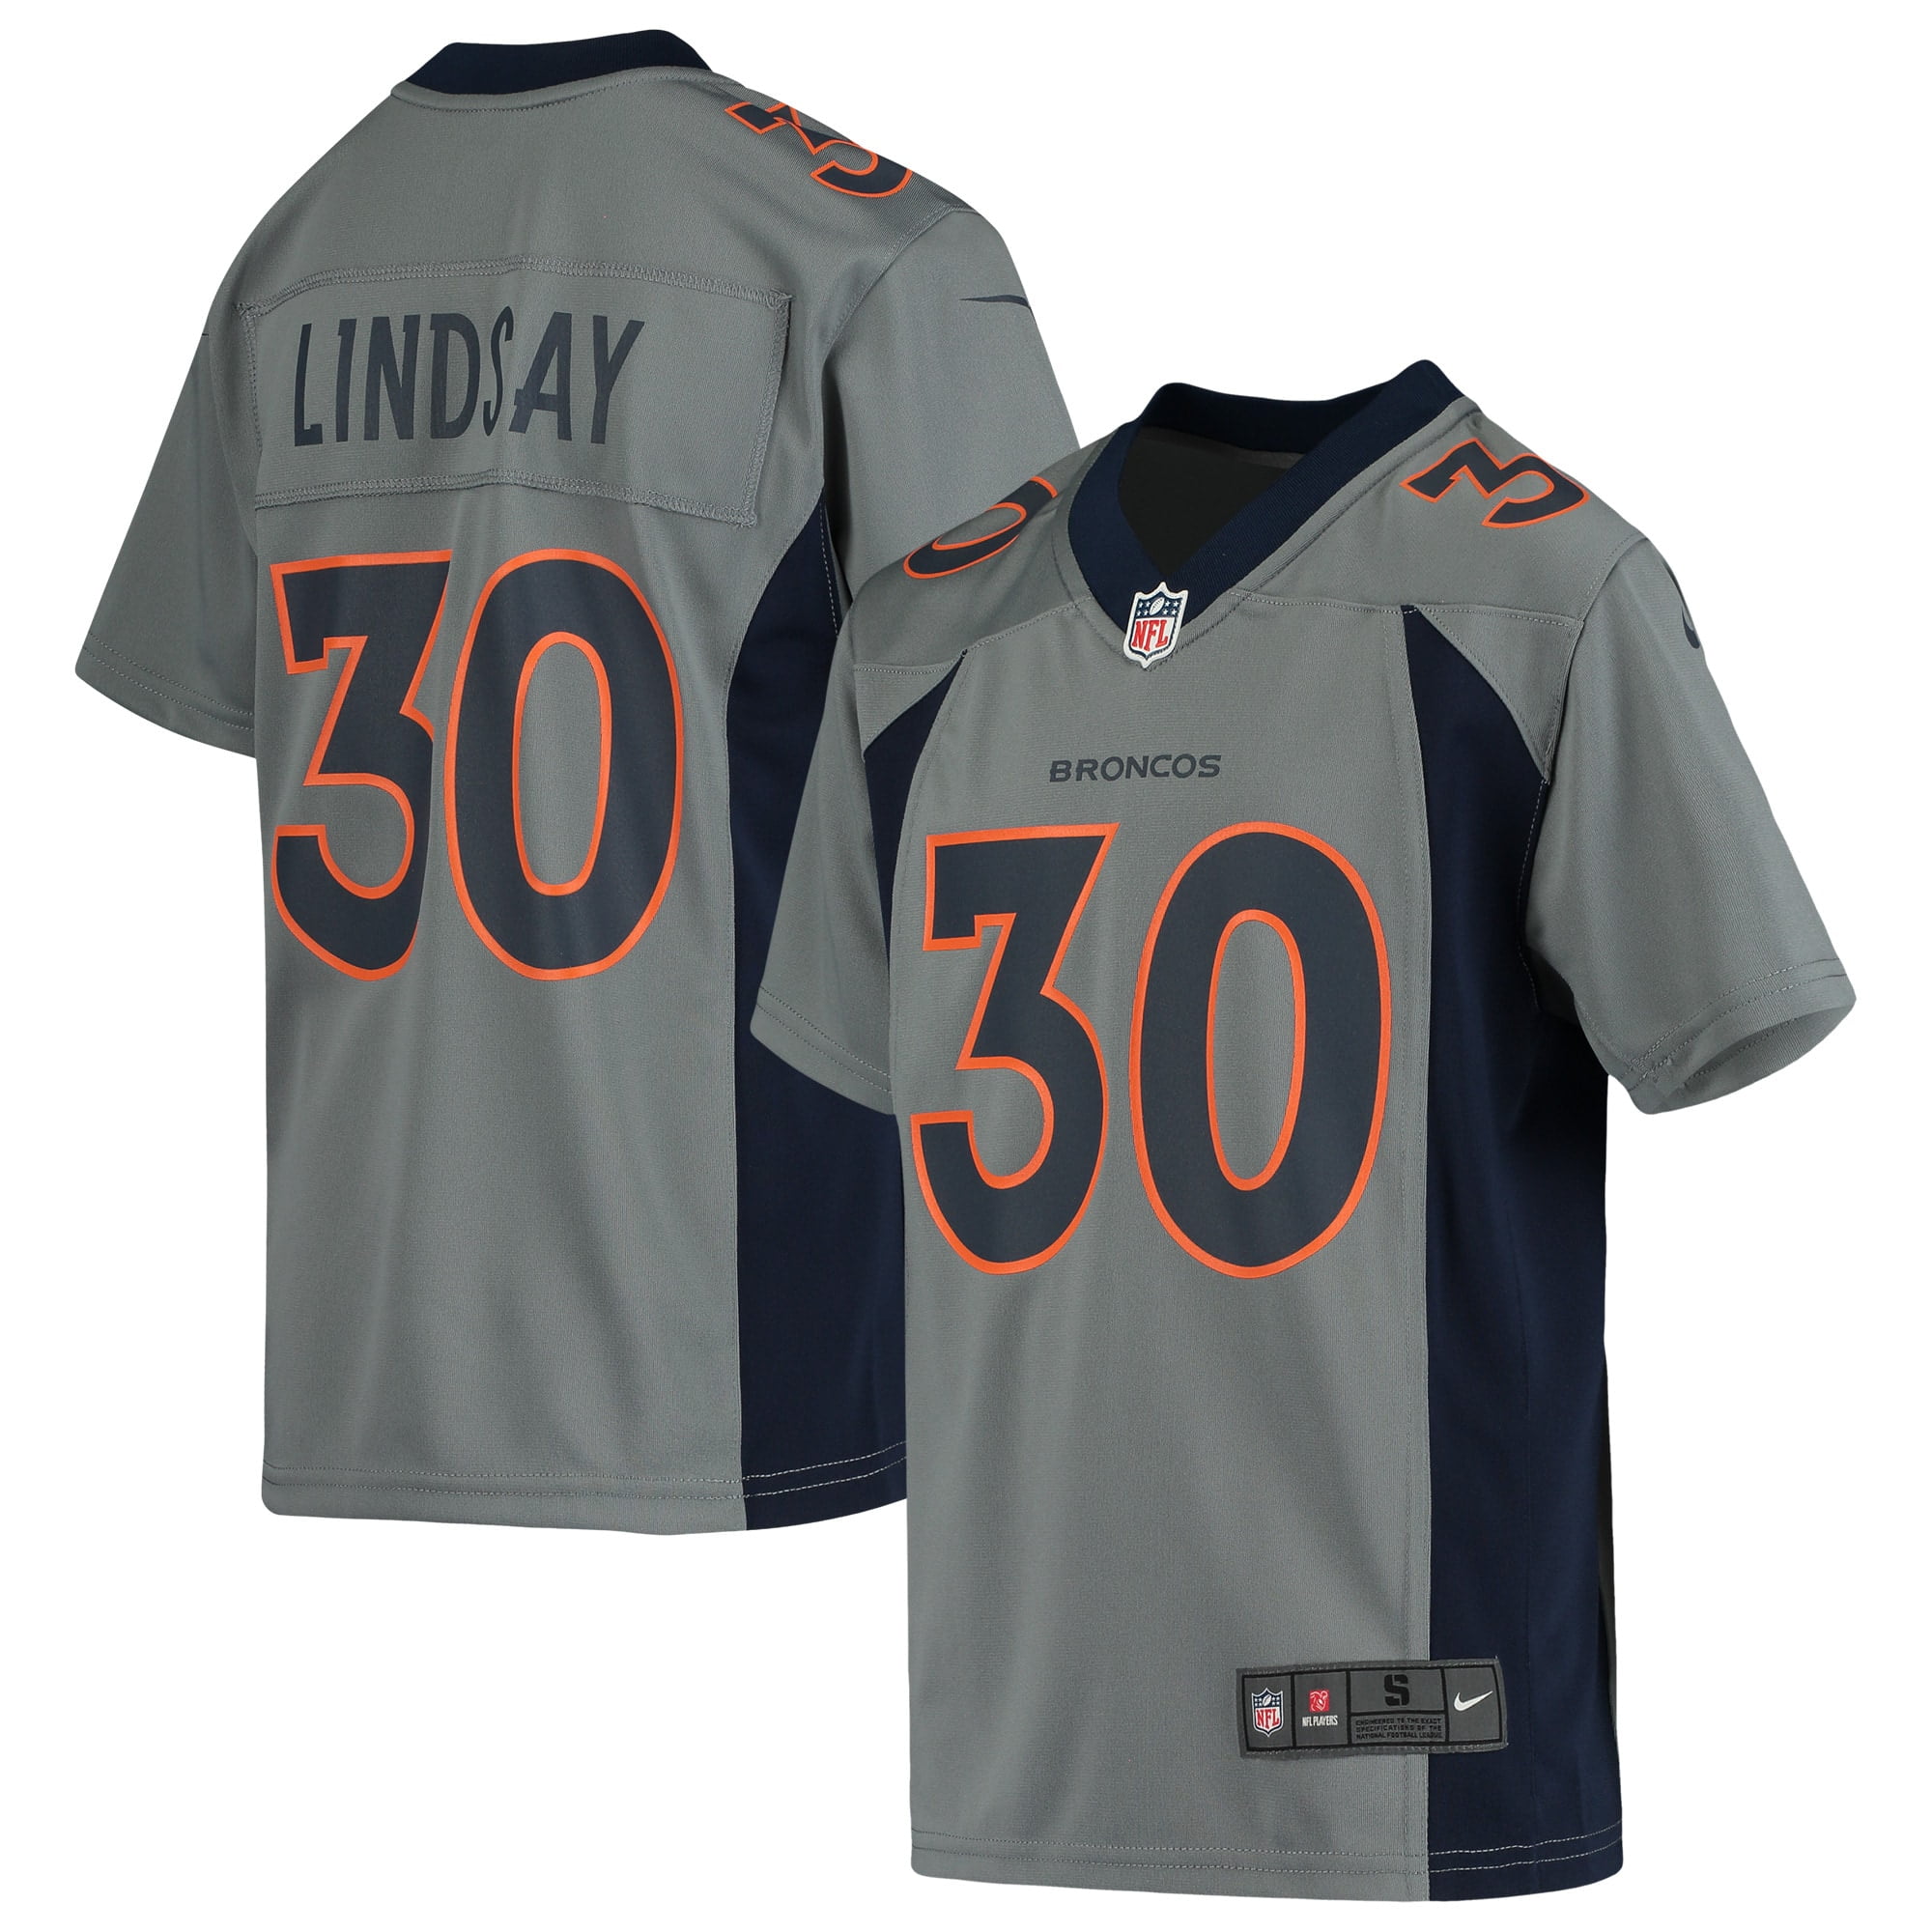 phillip lindsay jersey youth